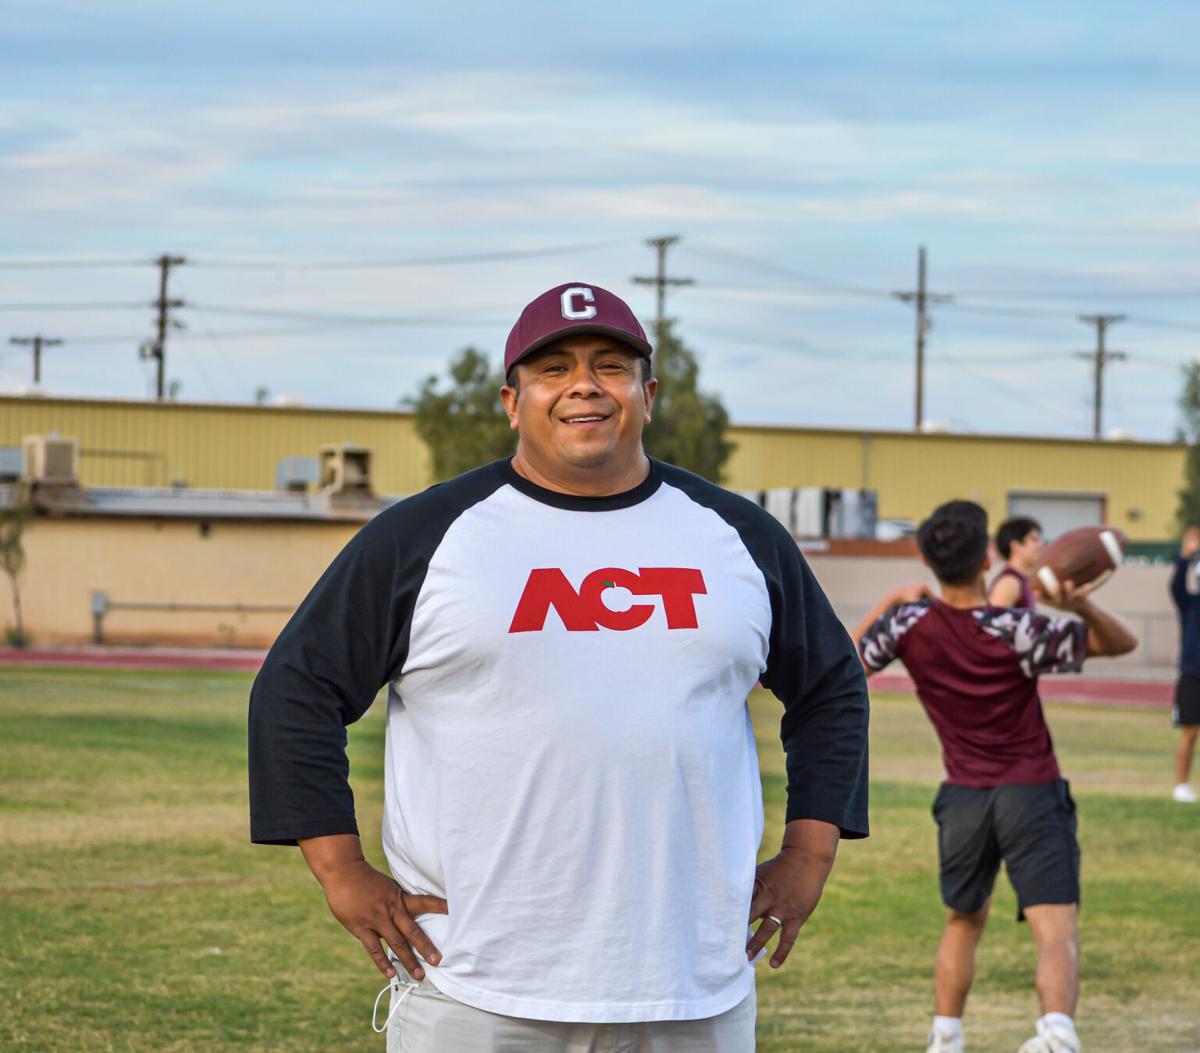 Calexico's Solano played the cards he was dealt into a winning hand